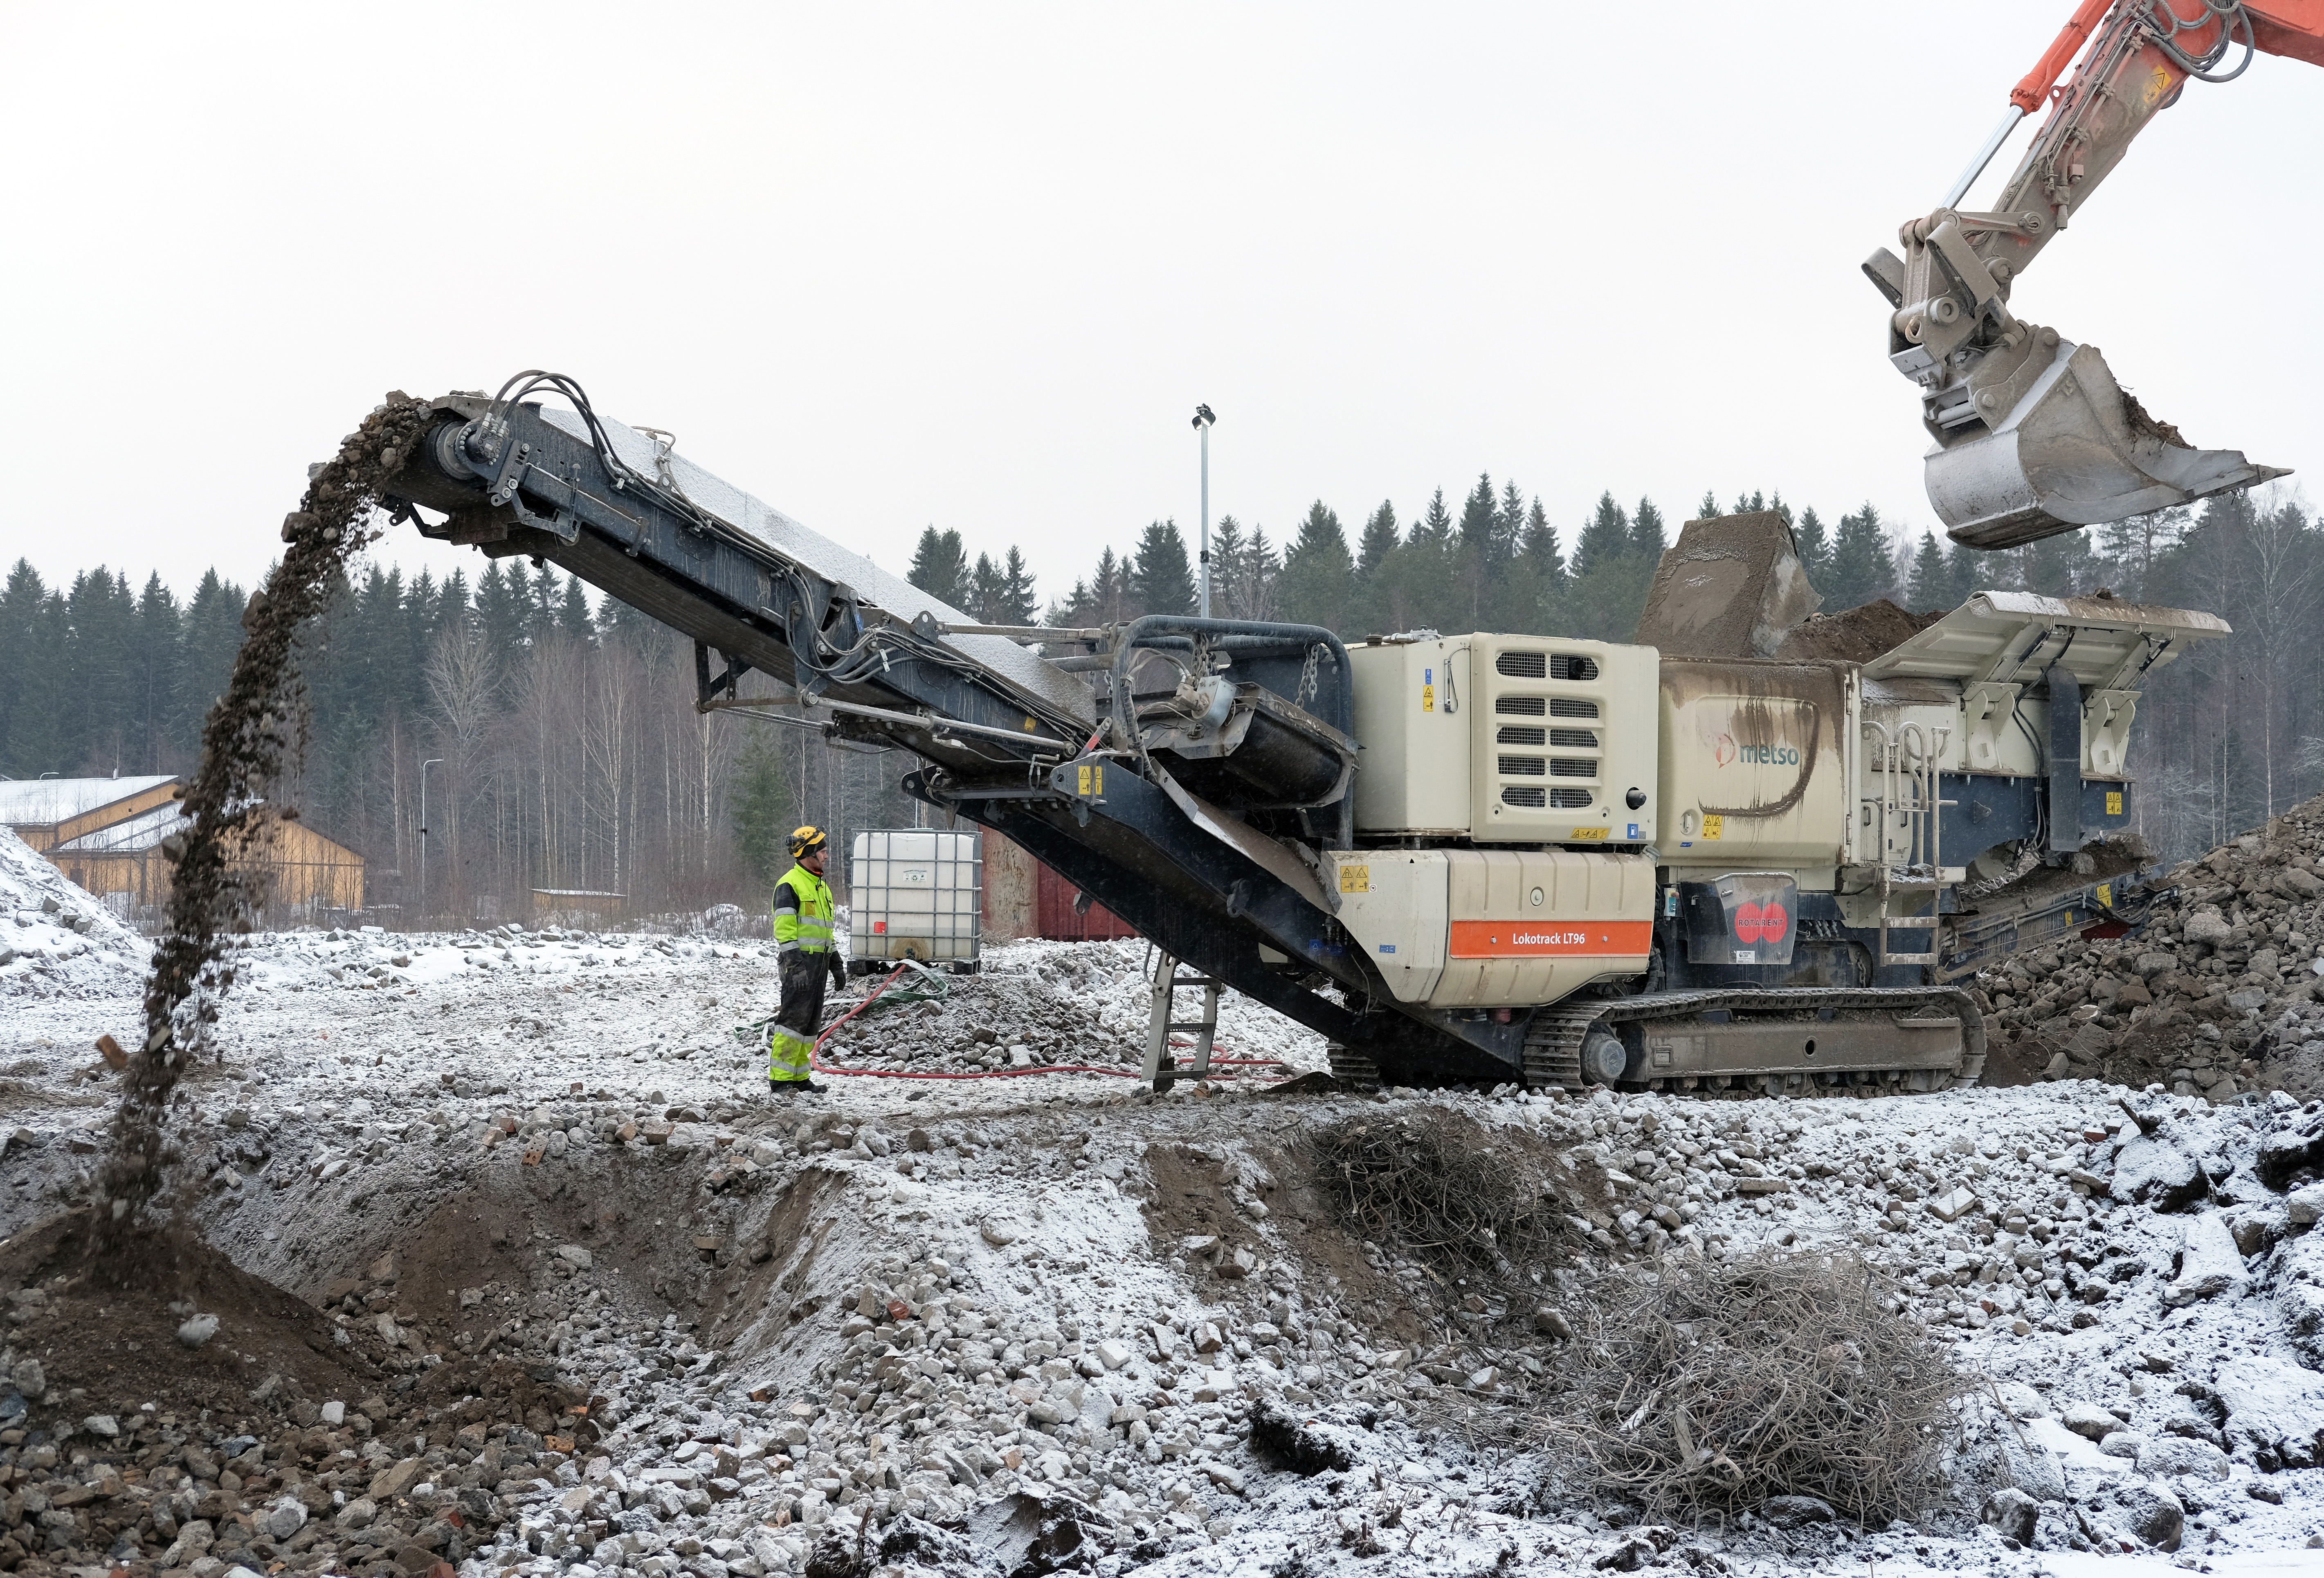 A noise- and dust-proof Lokotrack Urban LT96 in action in lightly snowy landscape.